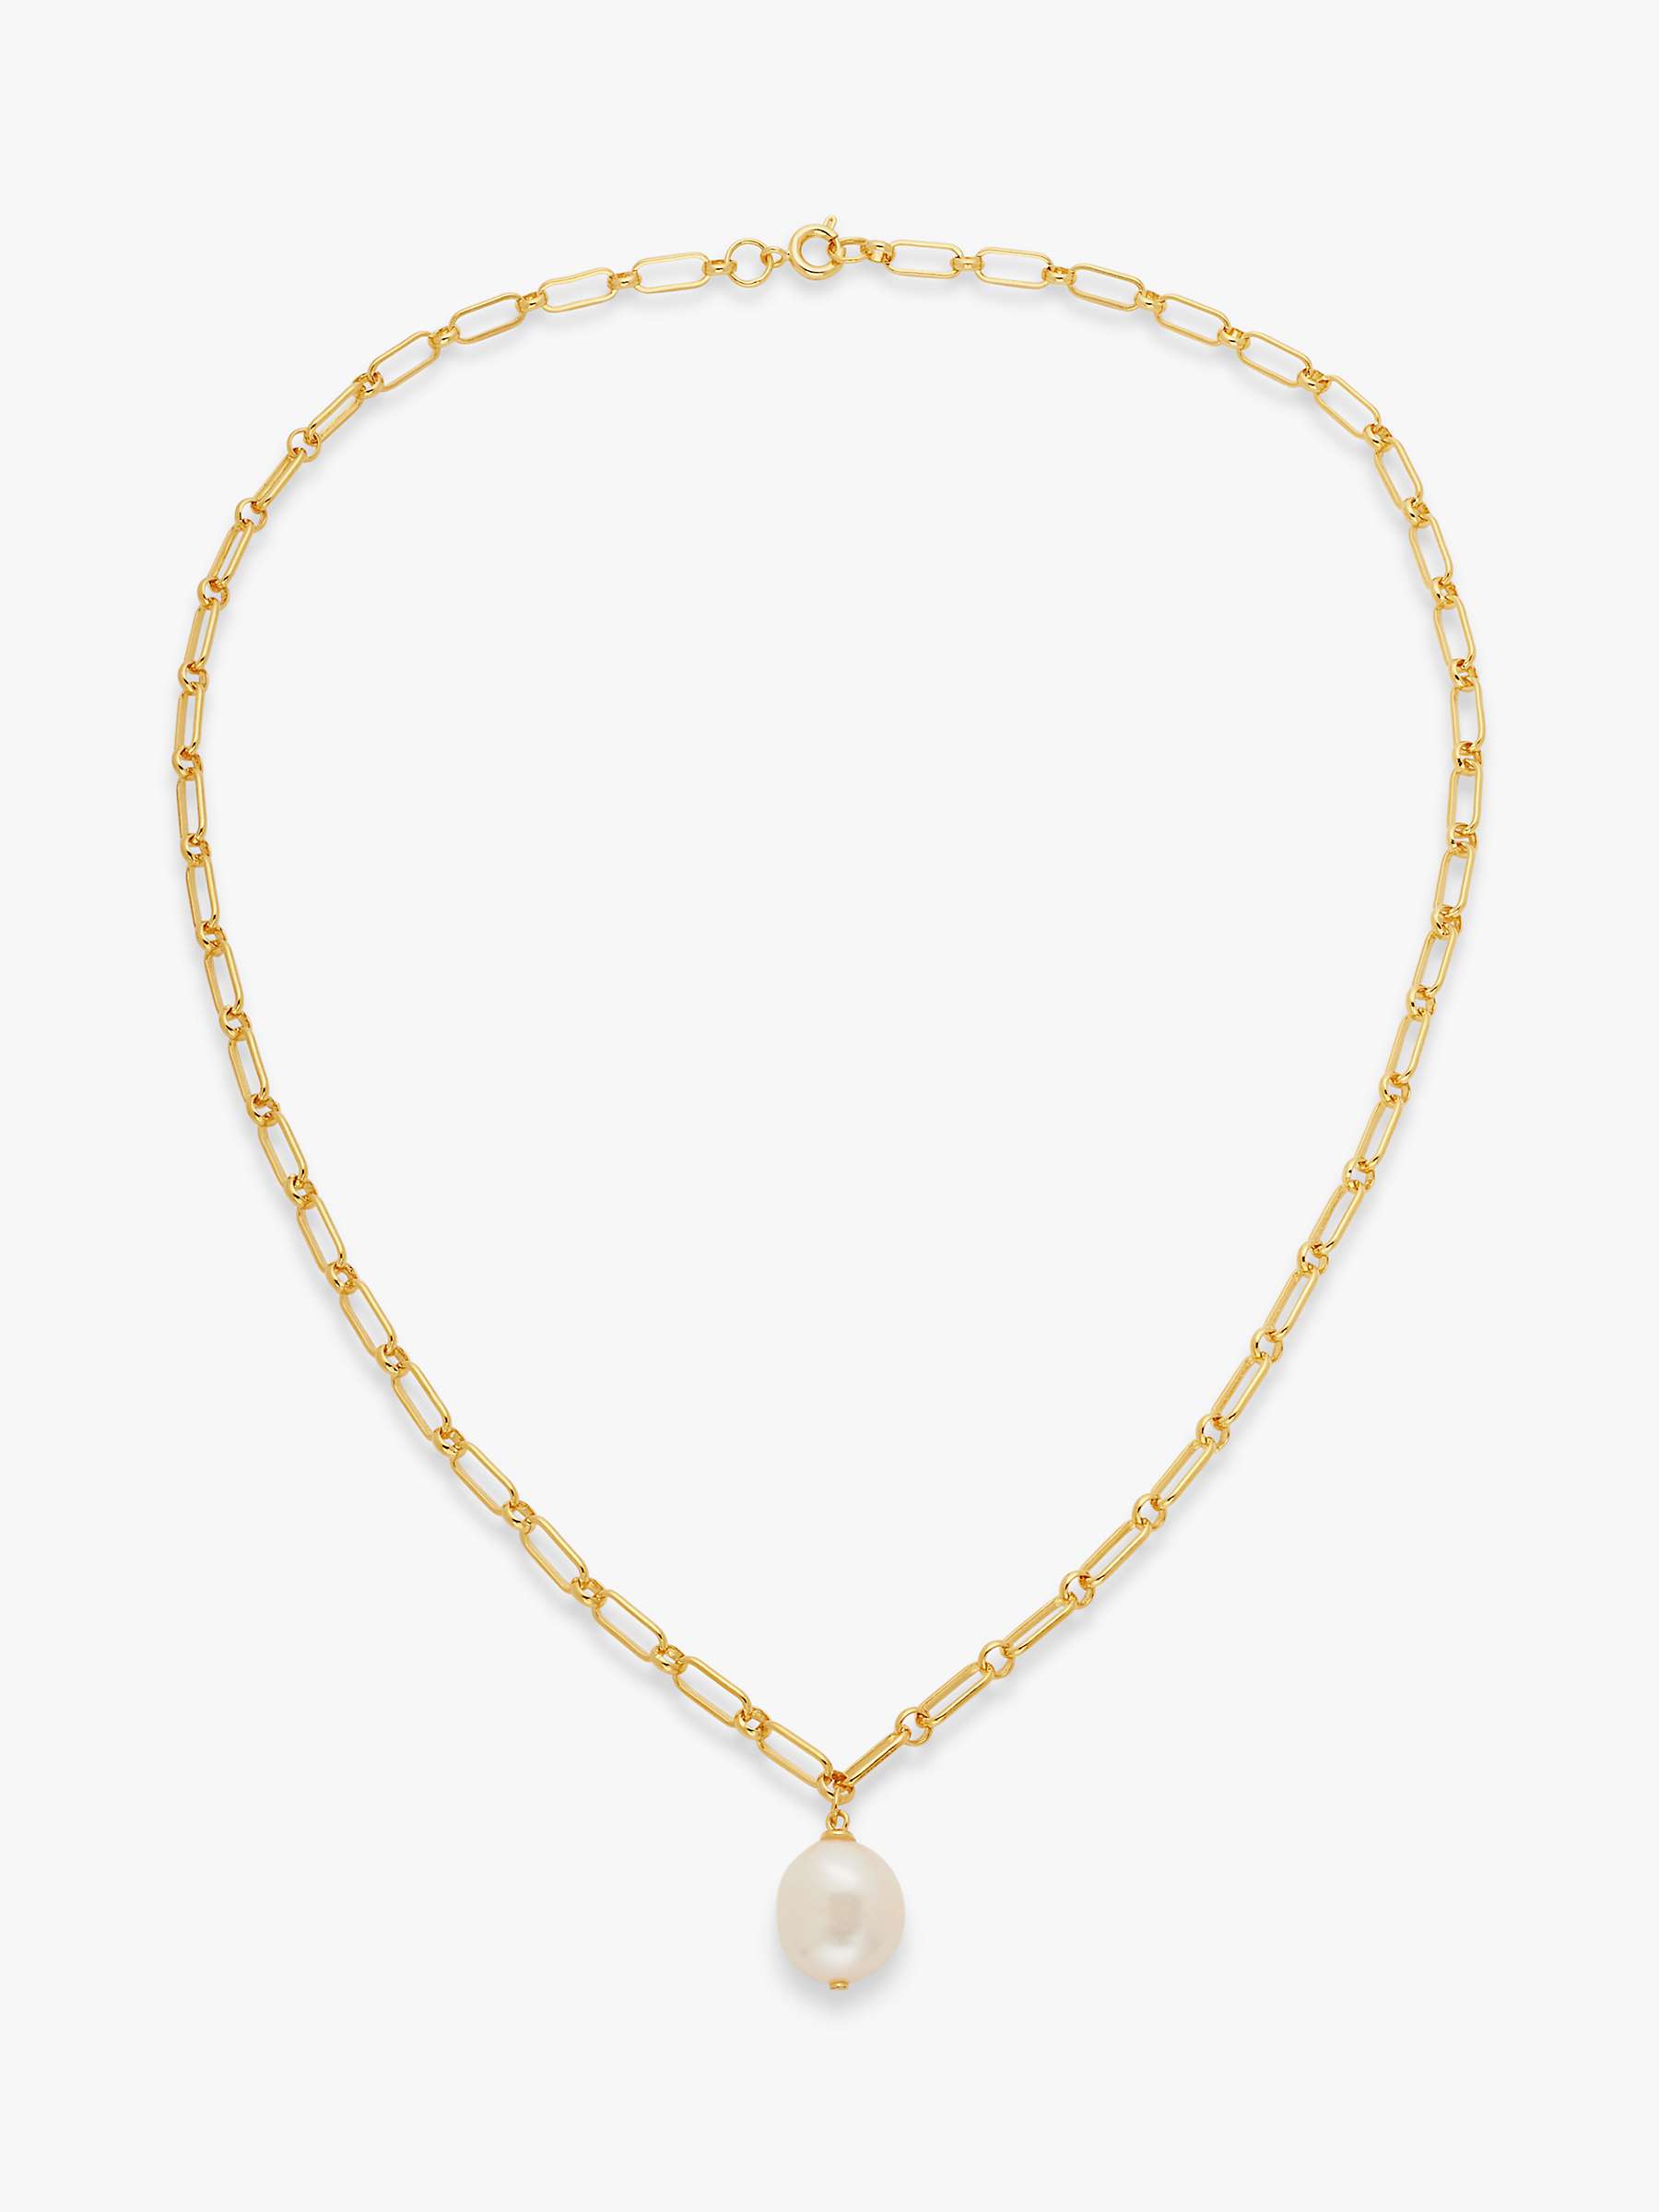 Buy John Lewis Gemstones & Pearls Baroque Pearl Paperclip Pendant Necklace, Gold Online at johnlewis.com